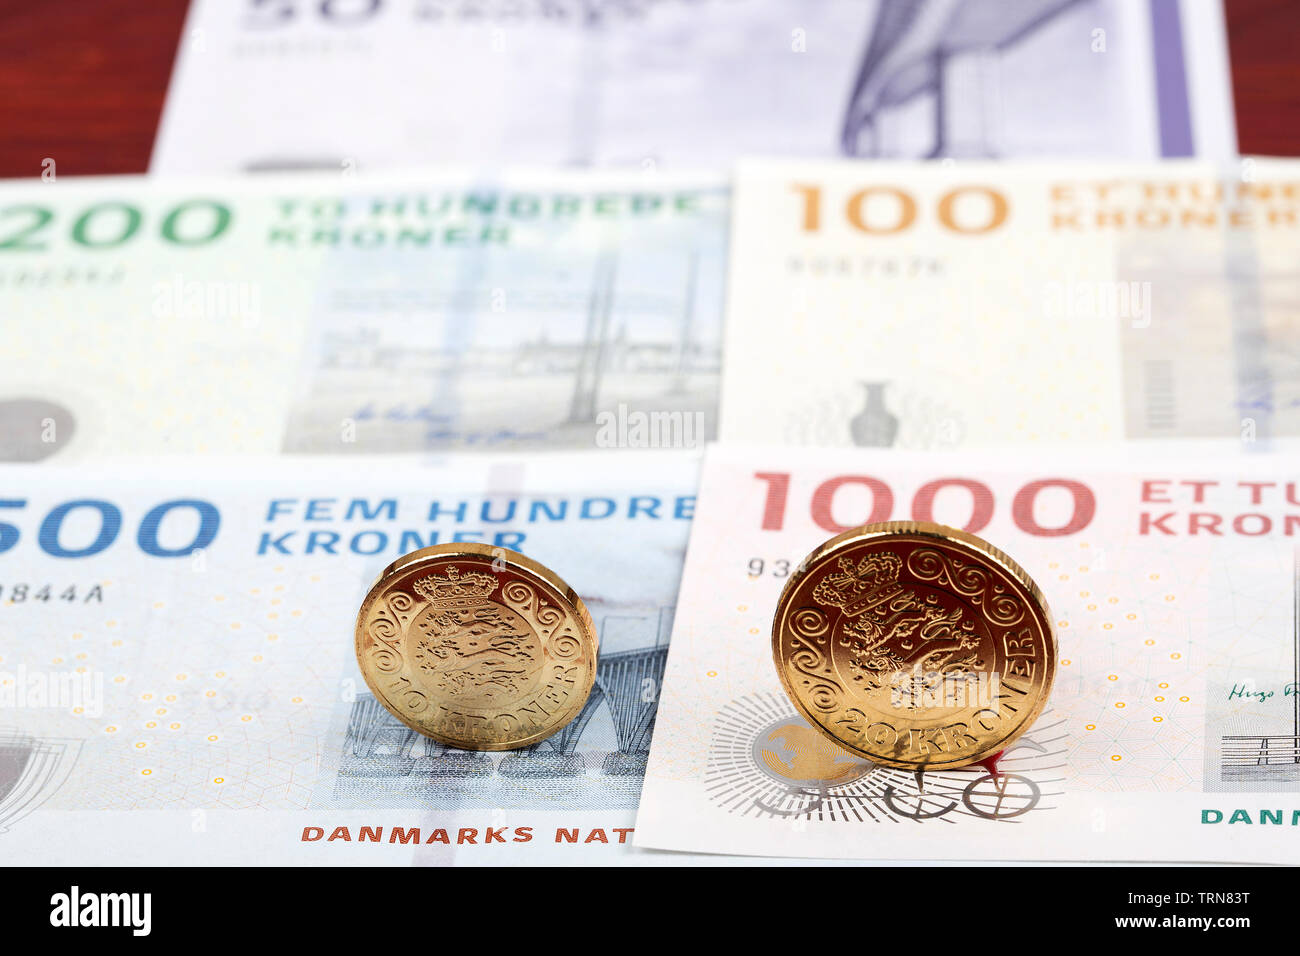 Danish coins on the background of banknotes Stock Photo